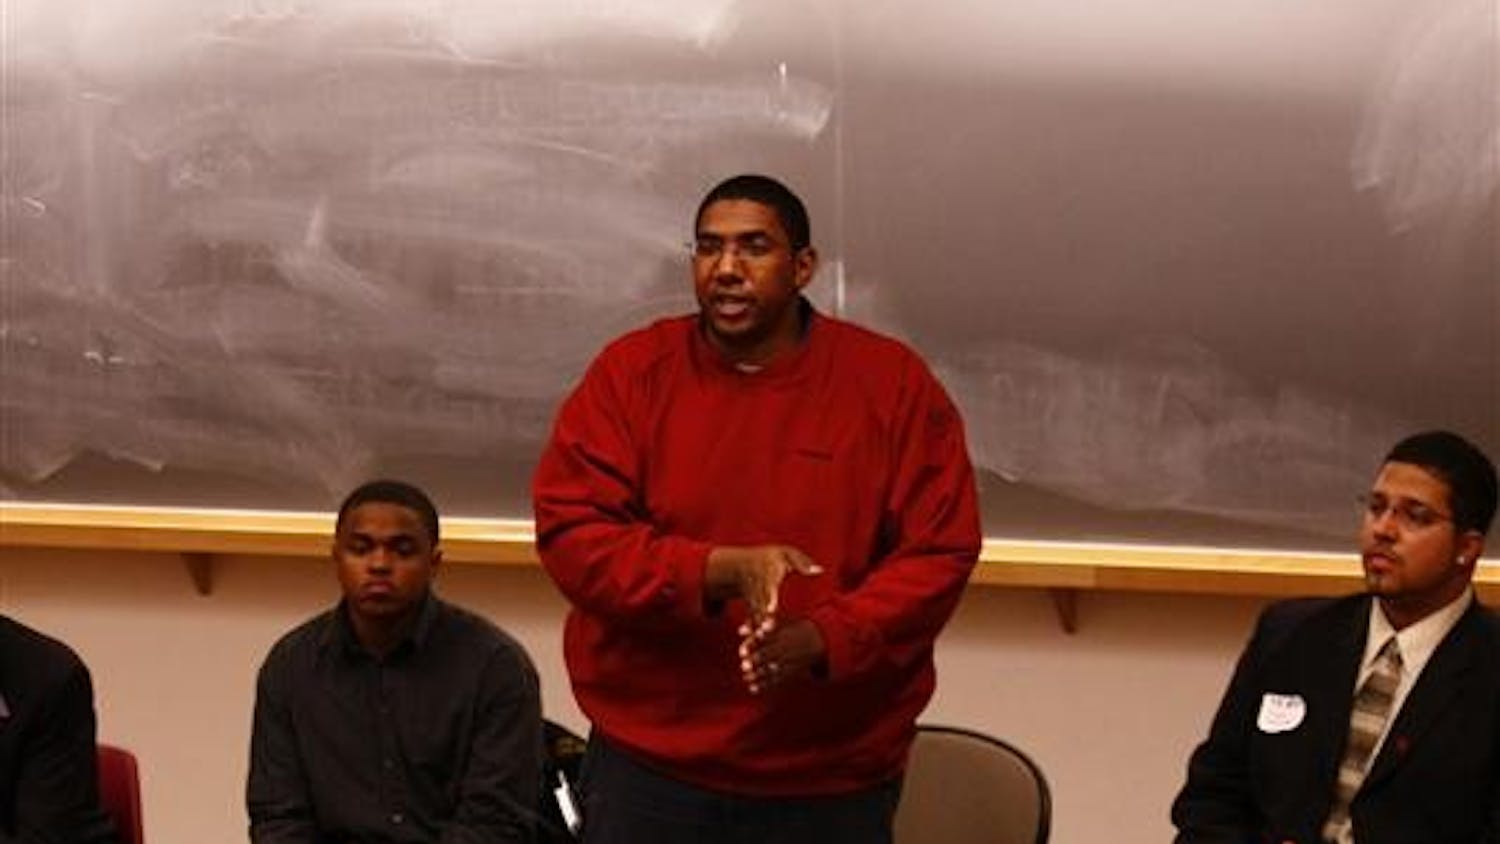 Reverend Jermaine Robinson speaks about mentoring within the African American community during the Men of Color Leadership Conference Friday afternoon at the Neal Marshall Black Cultural Center.